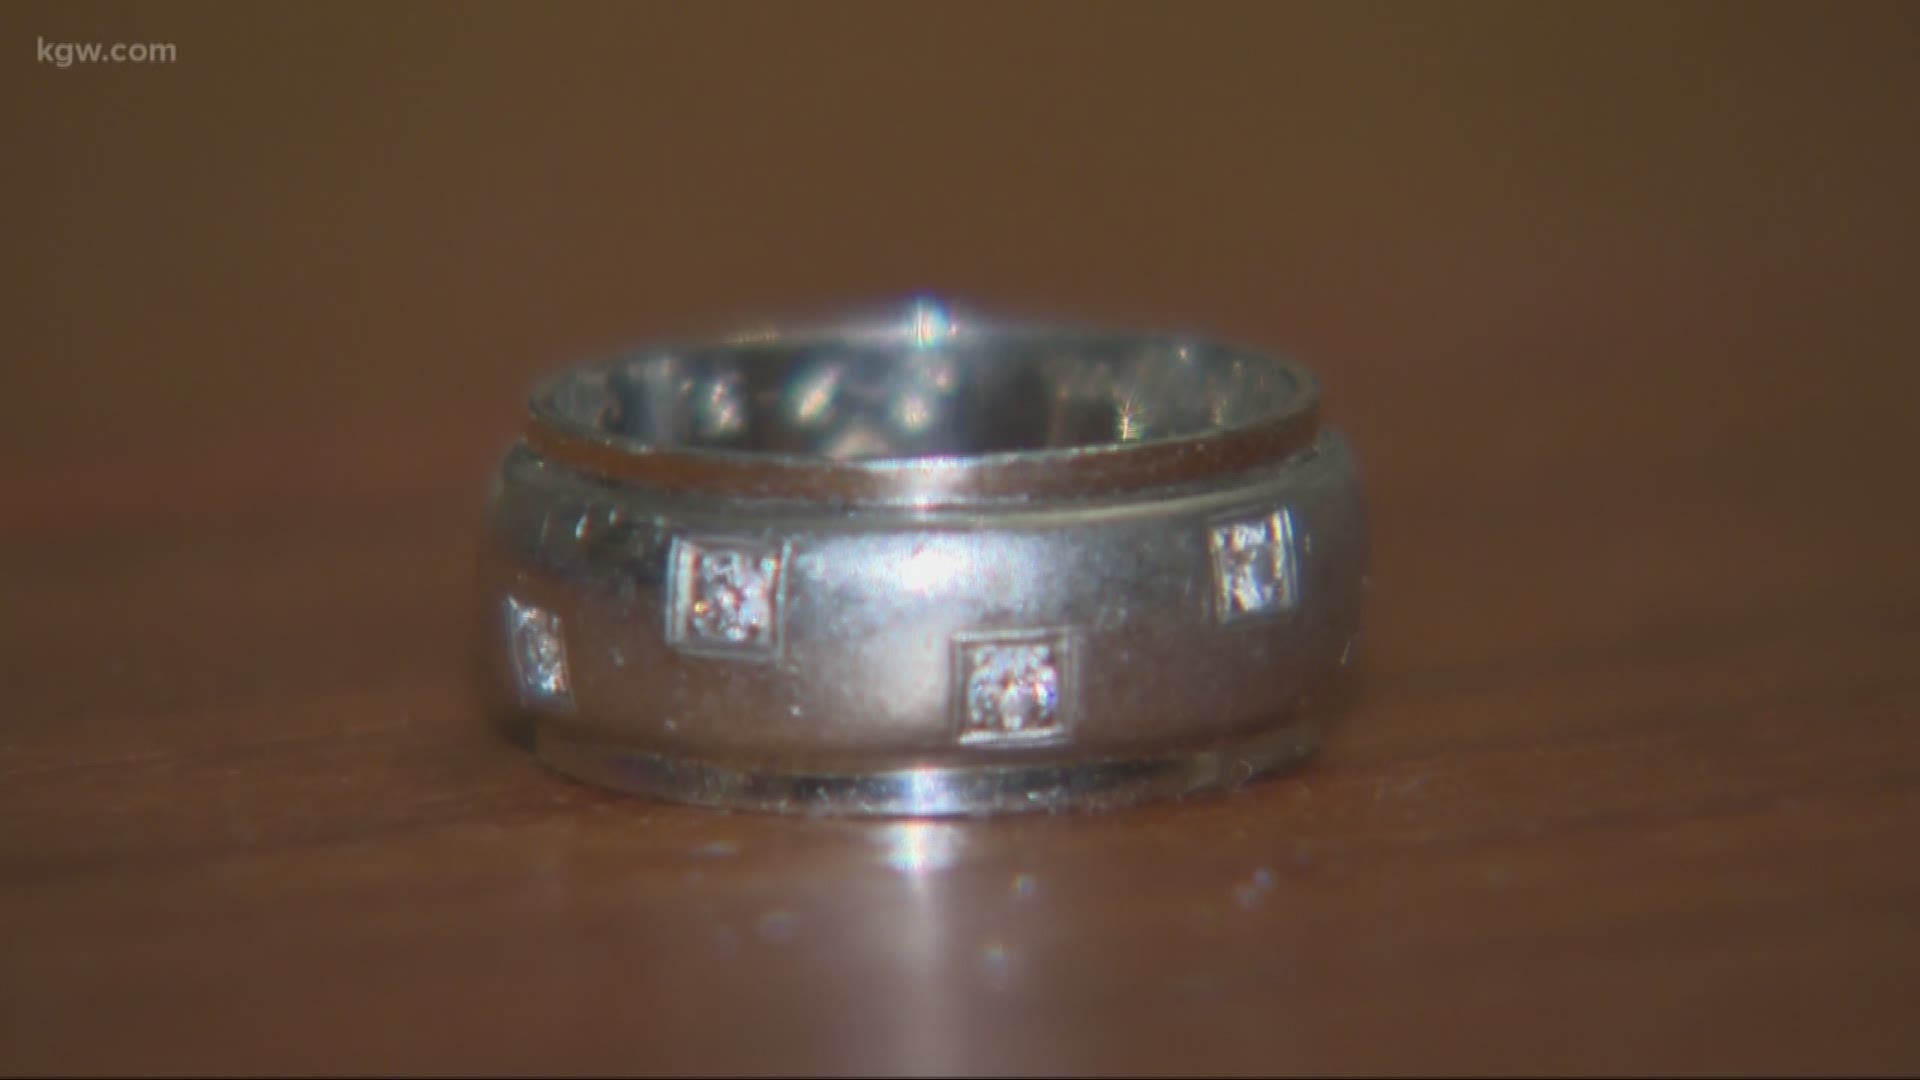 Woman reunited with lost wedding ring